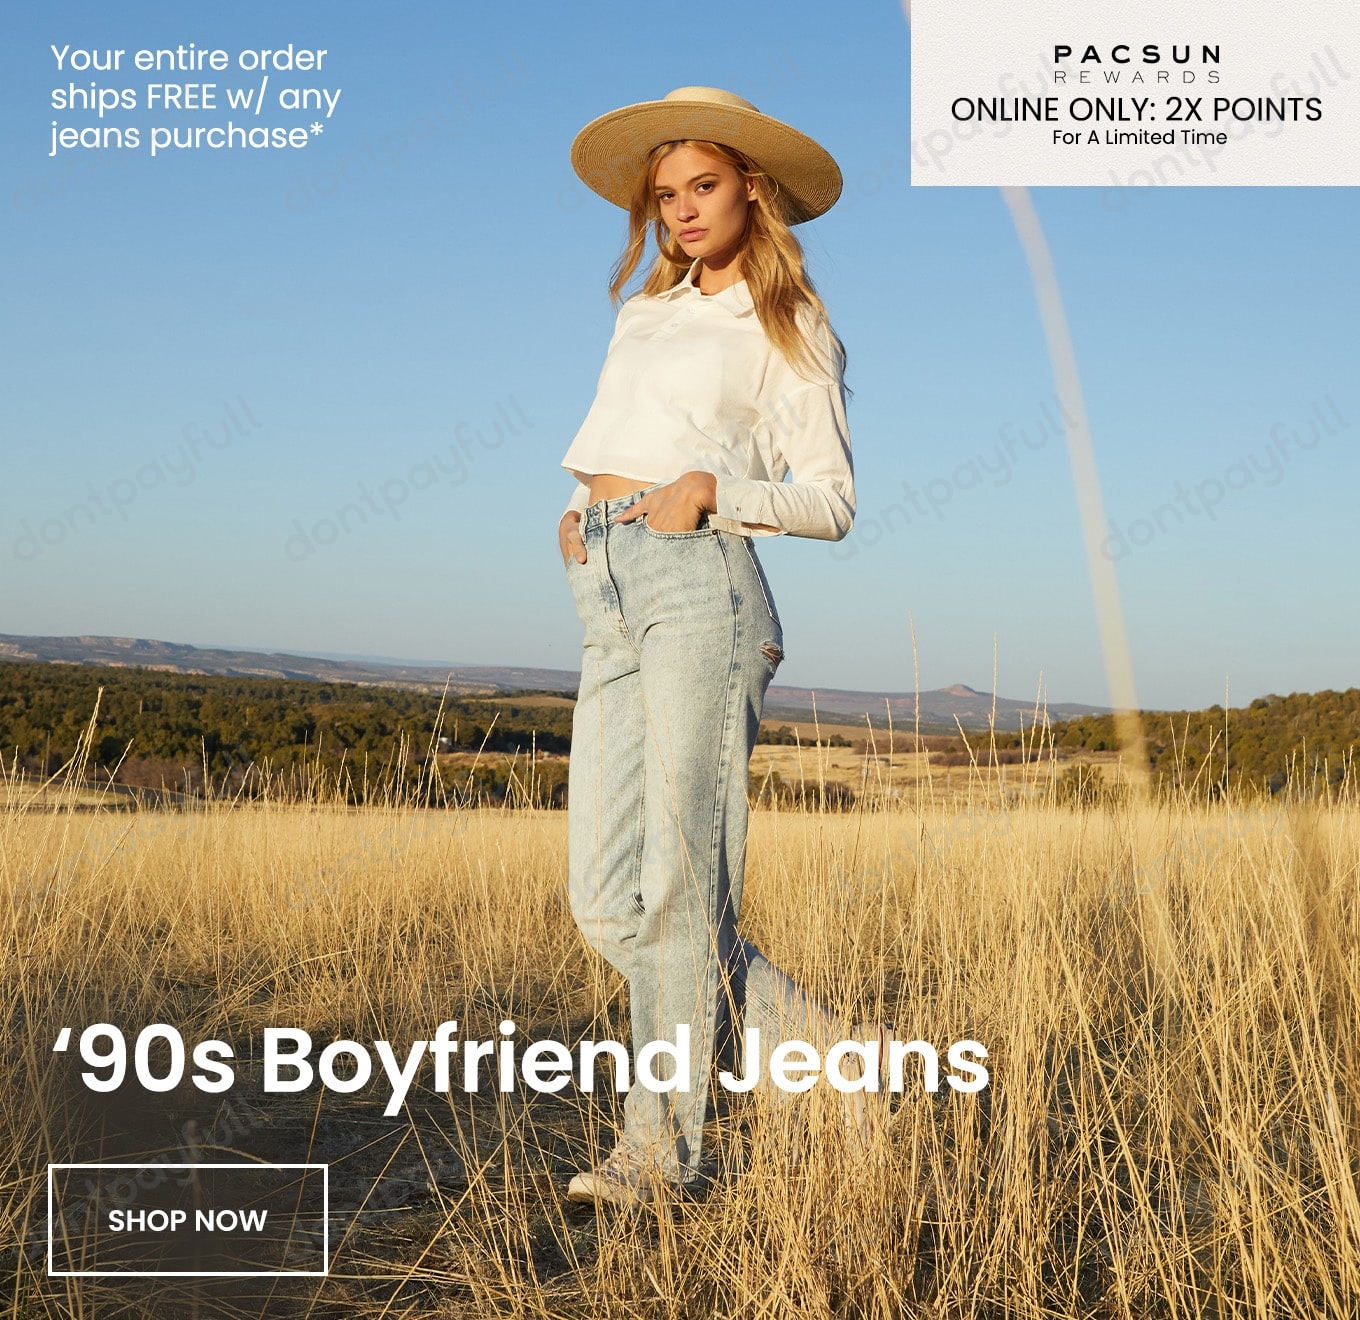 75% Off PacSun Coupons, Promo Codes & Free Shipping - 2021